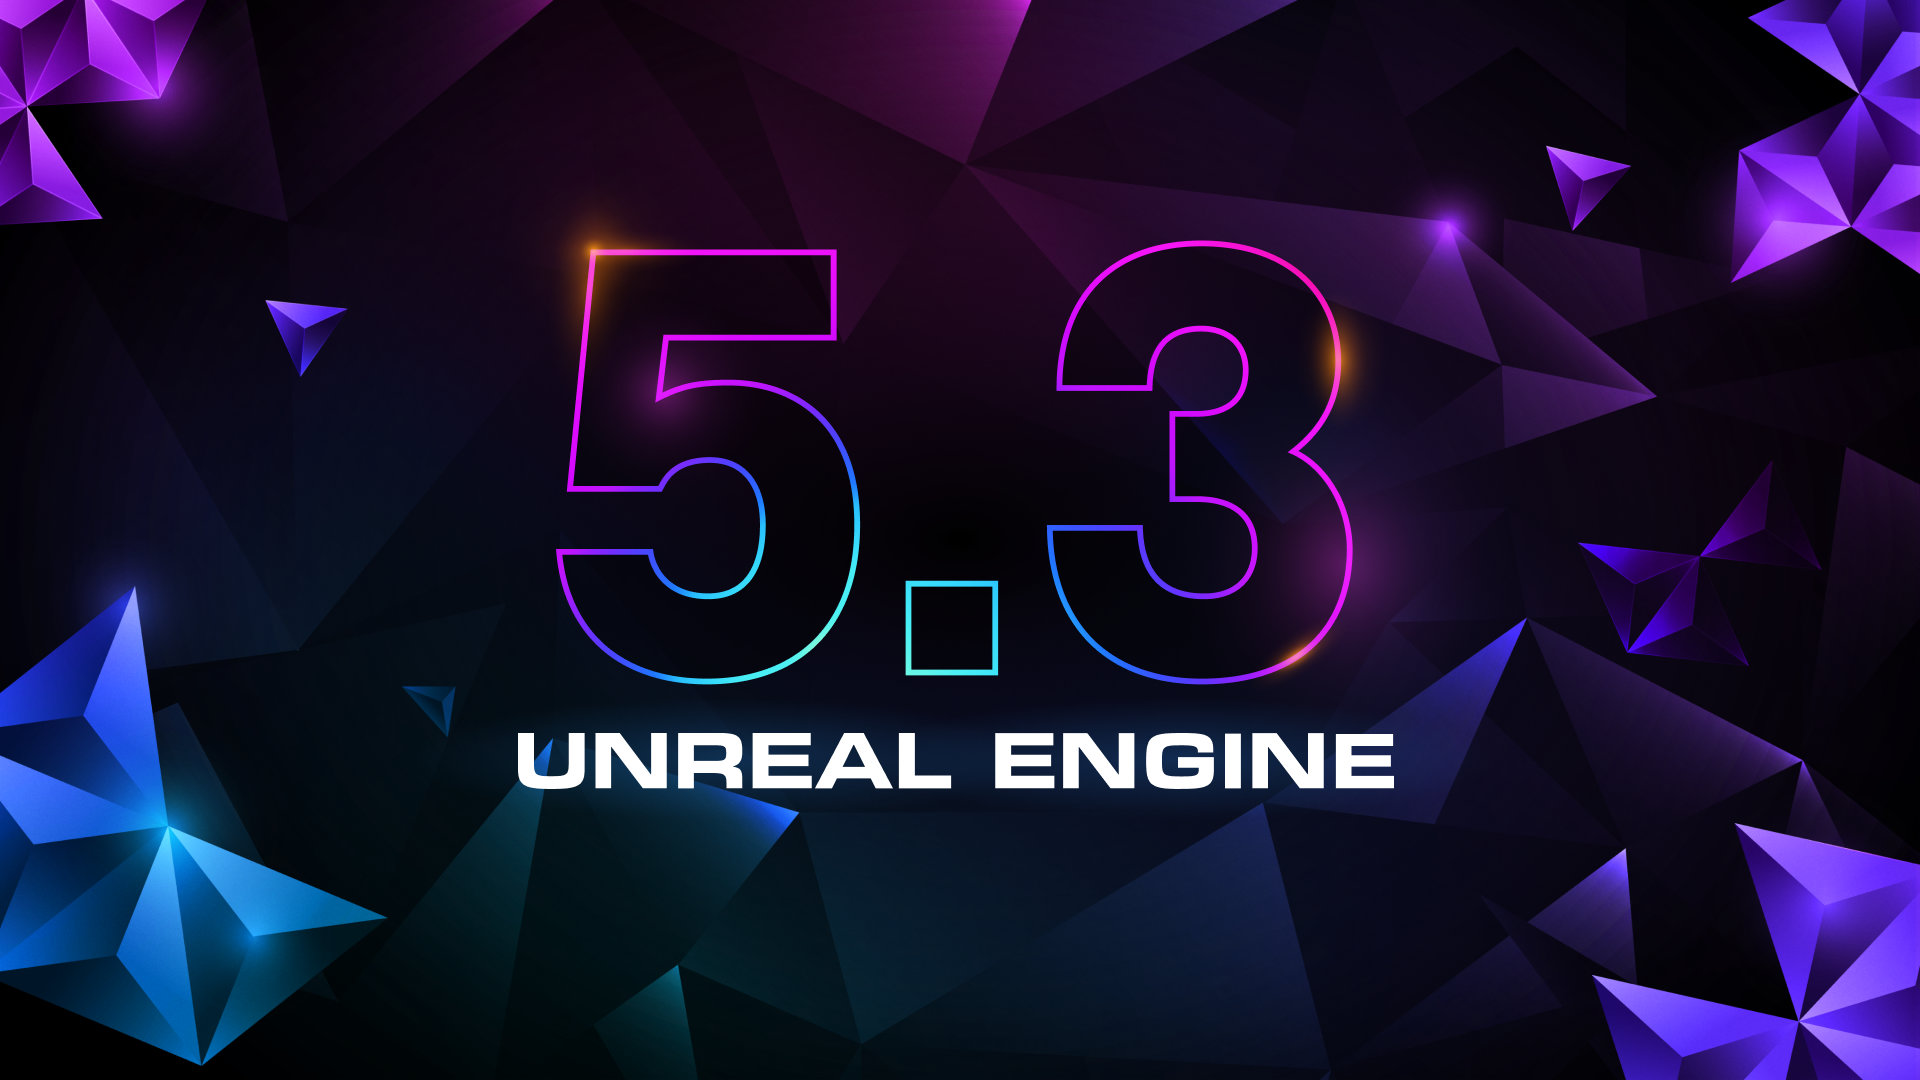 Unreal Engine 5.3 now emulates traditional camera movement